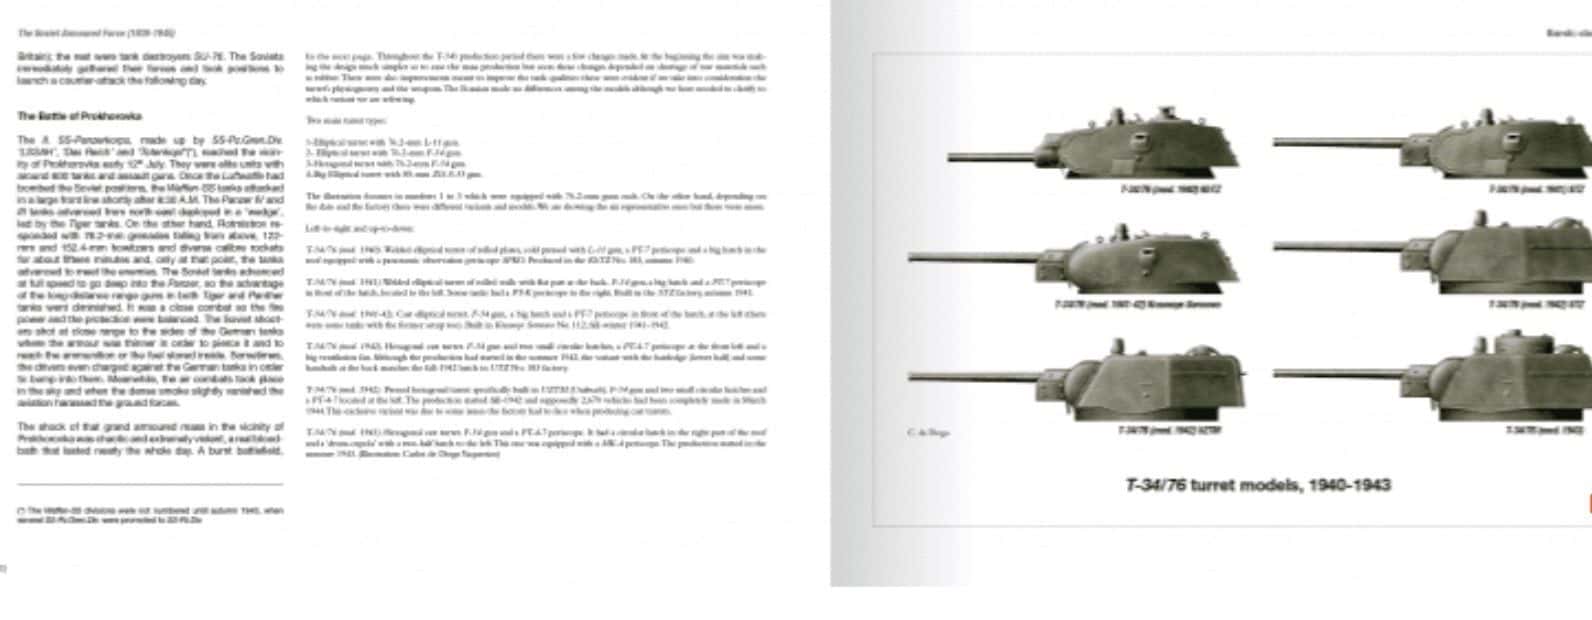 610 armed forces USSR turrets